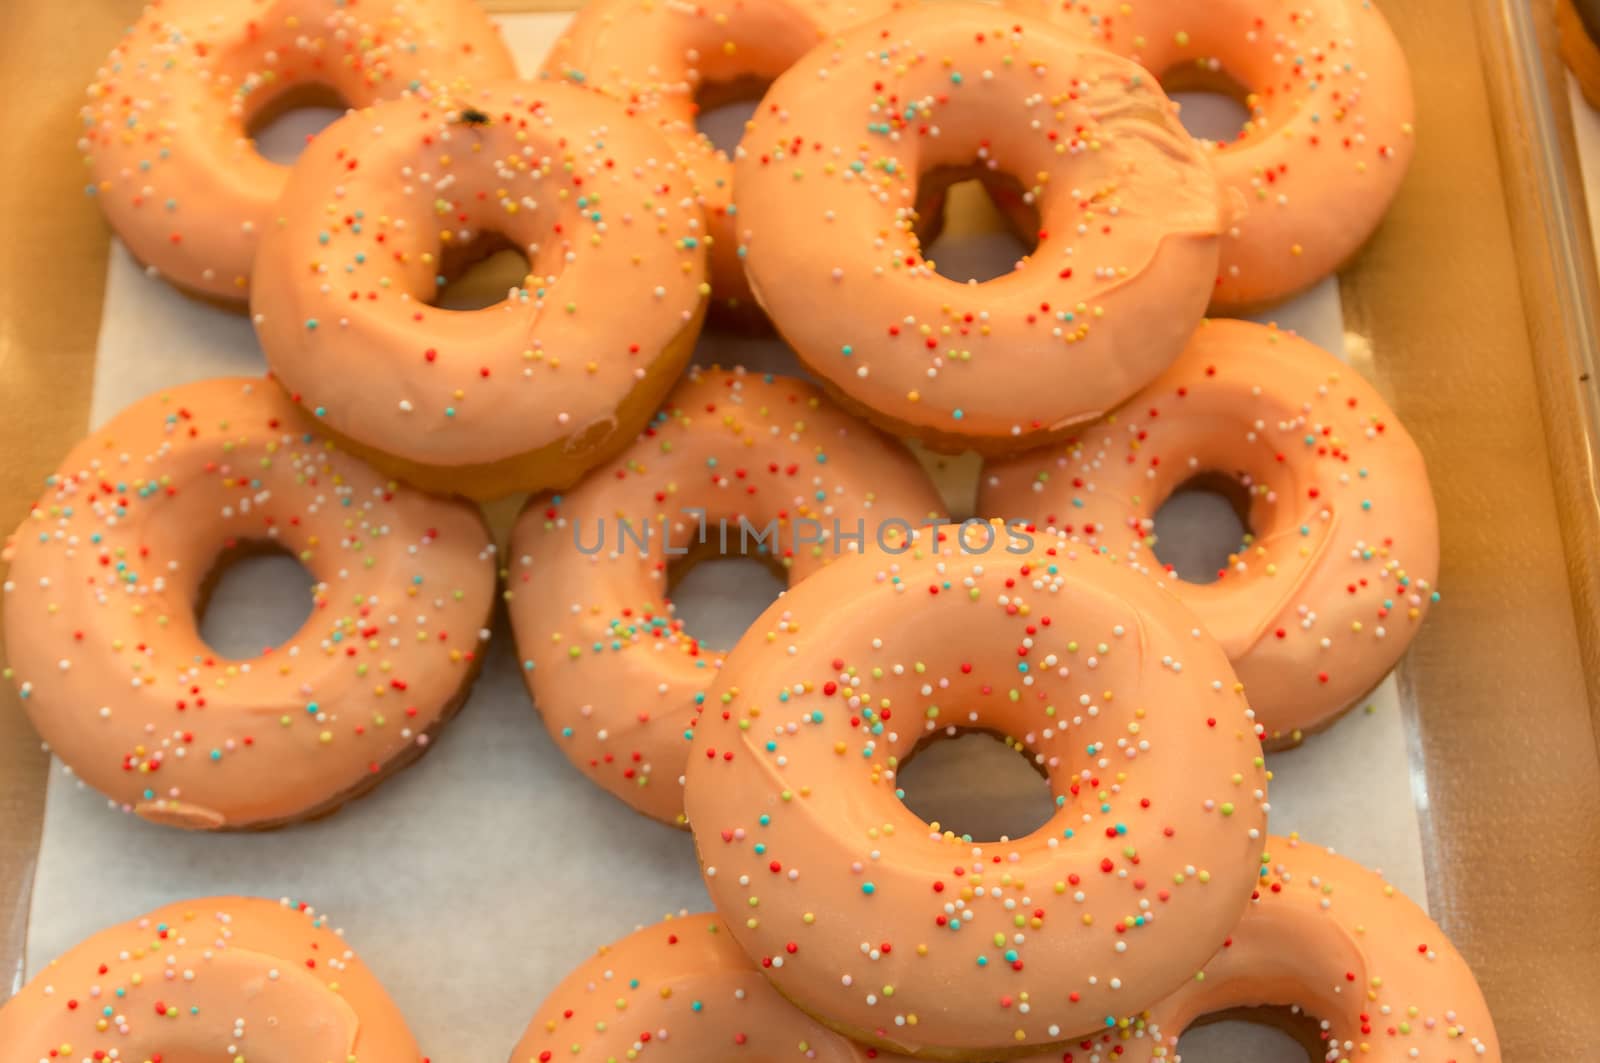 Fresh Donuts with Color Sugar Granules Decorated on shelf. Selective Focus on Big donut